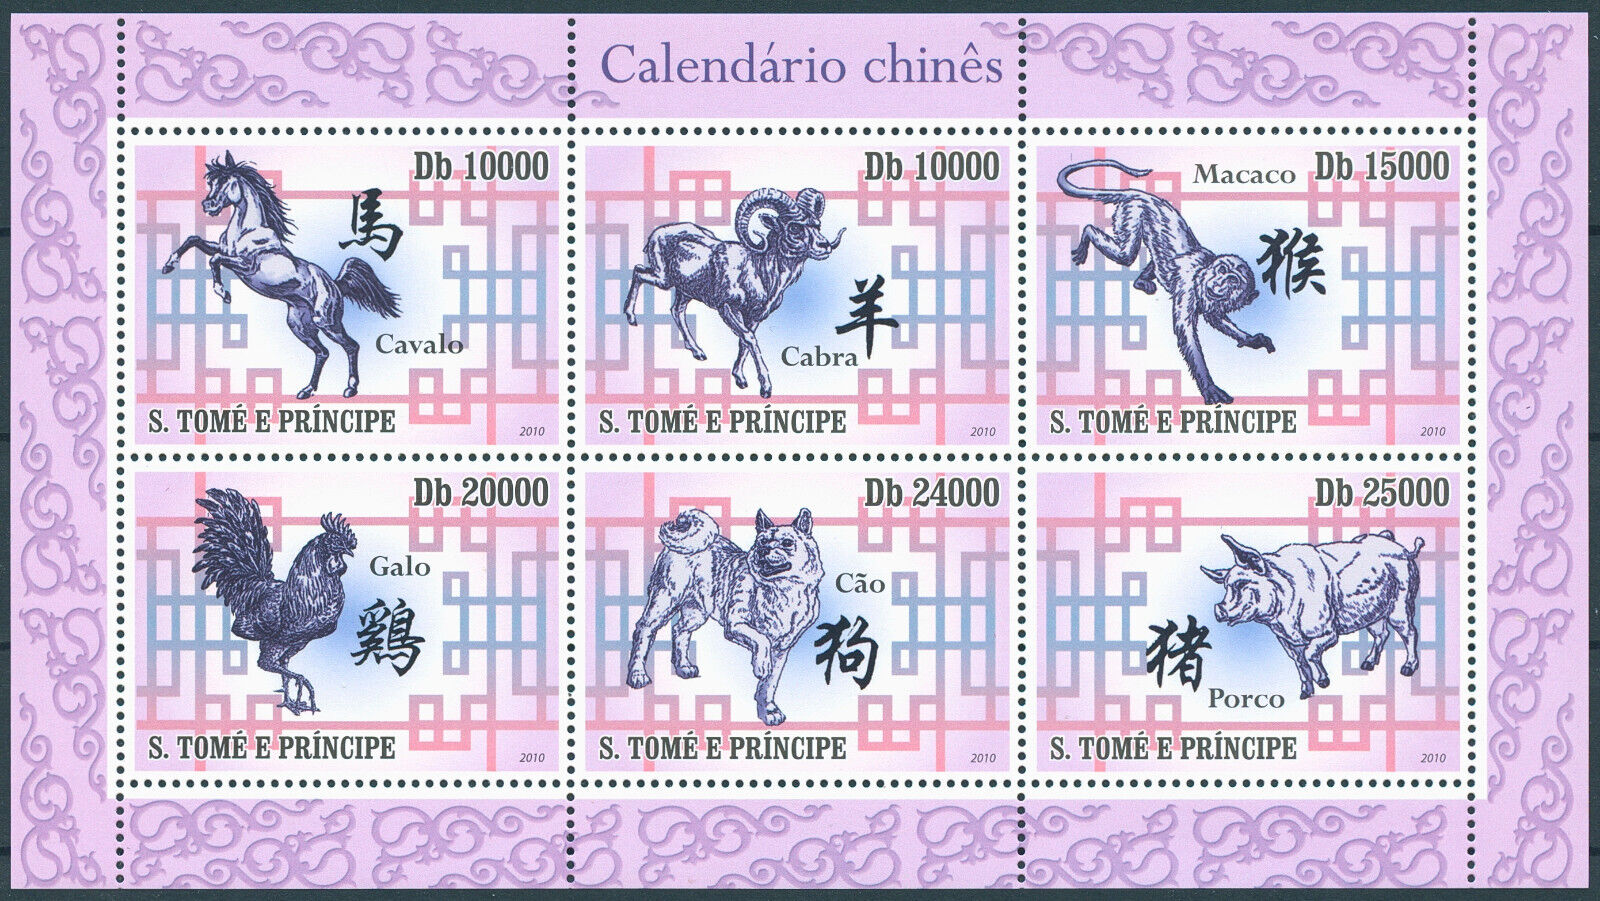 Sao Tome & Principe 2010 MNH Chinese Lunar New Year Stamps Pig Dog Goat 6v M/S I